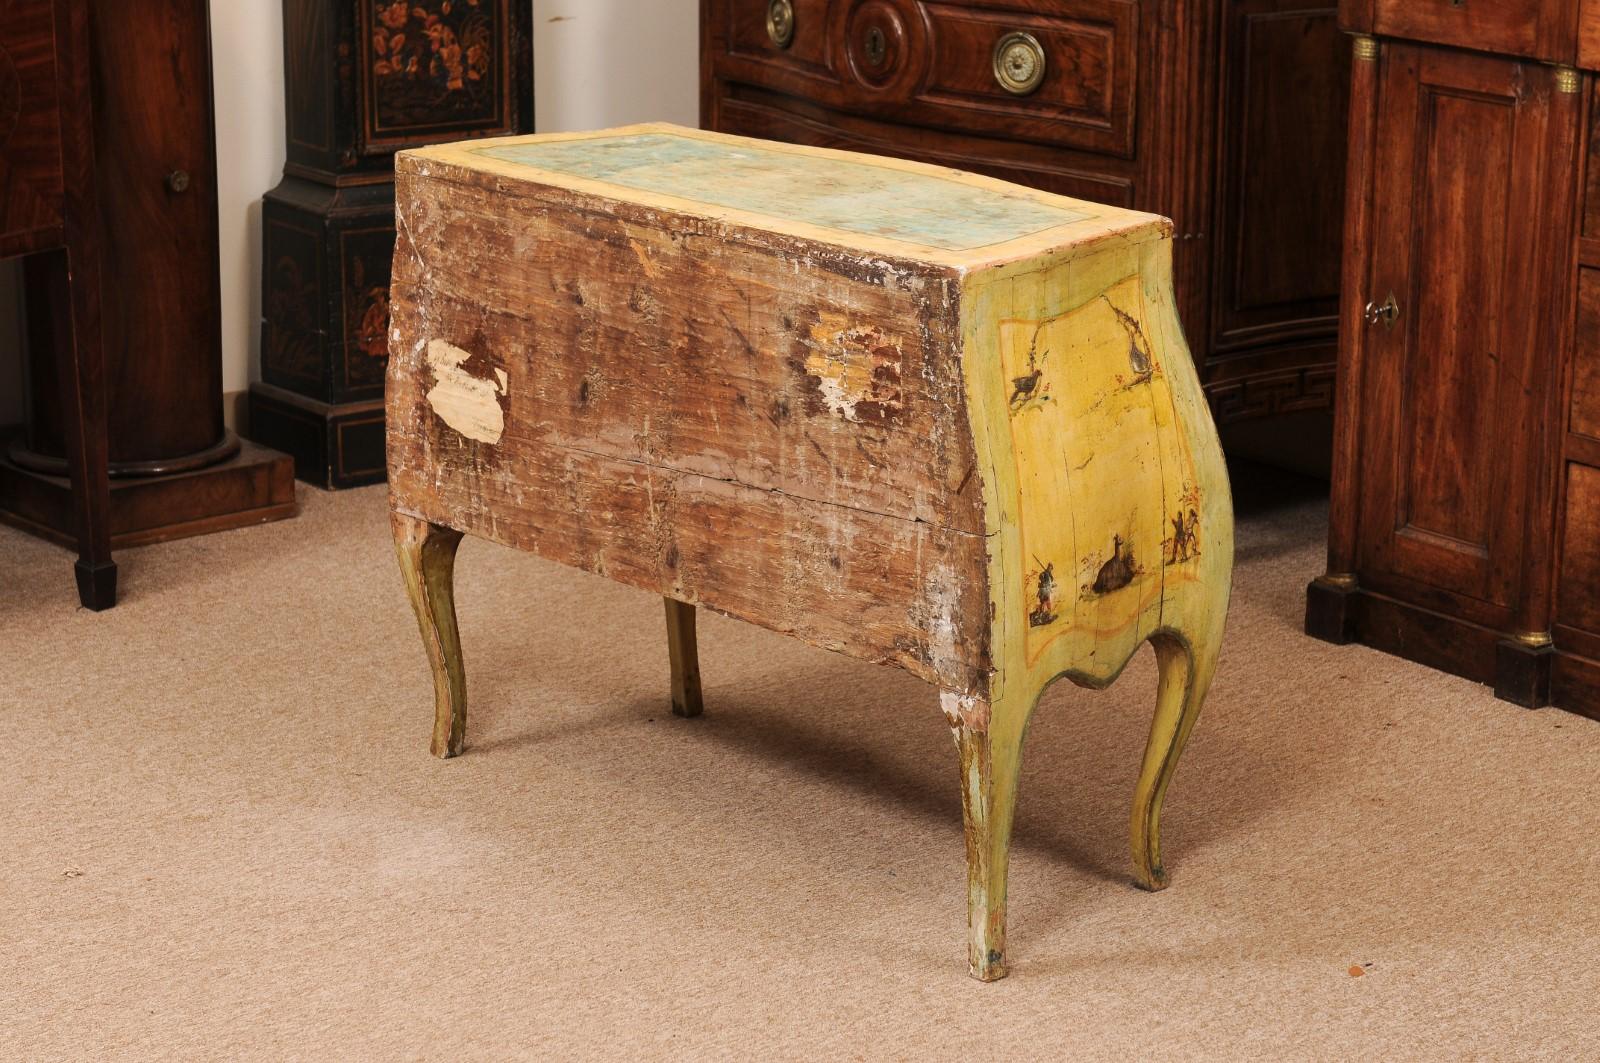  18th Century Italian Venetian Painted Yellow Commode with Decoupage Decoration  For Sale 2